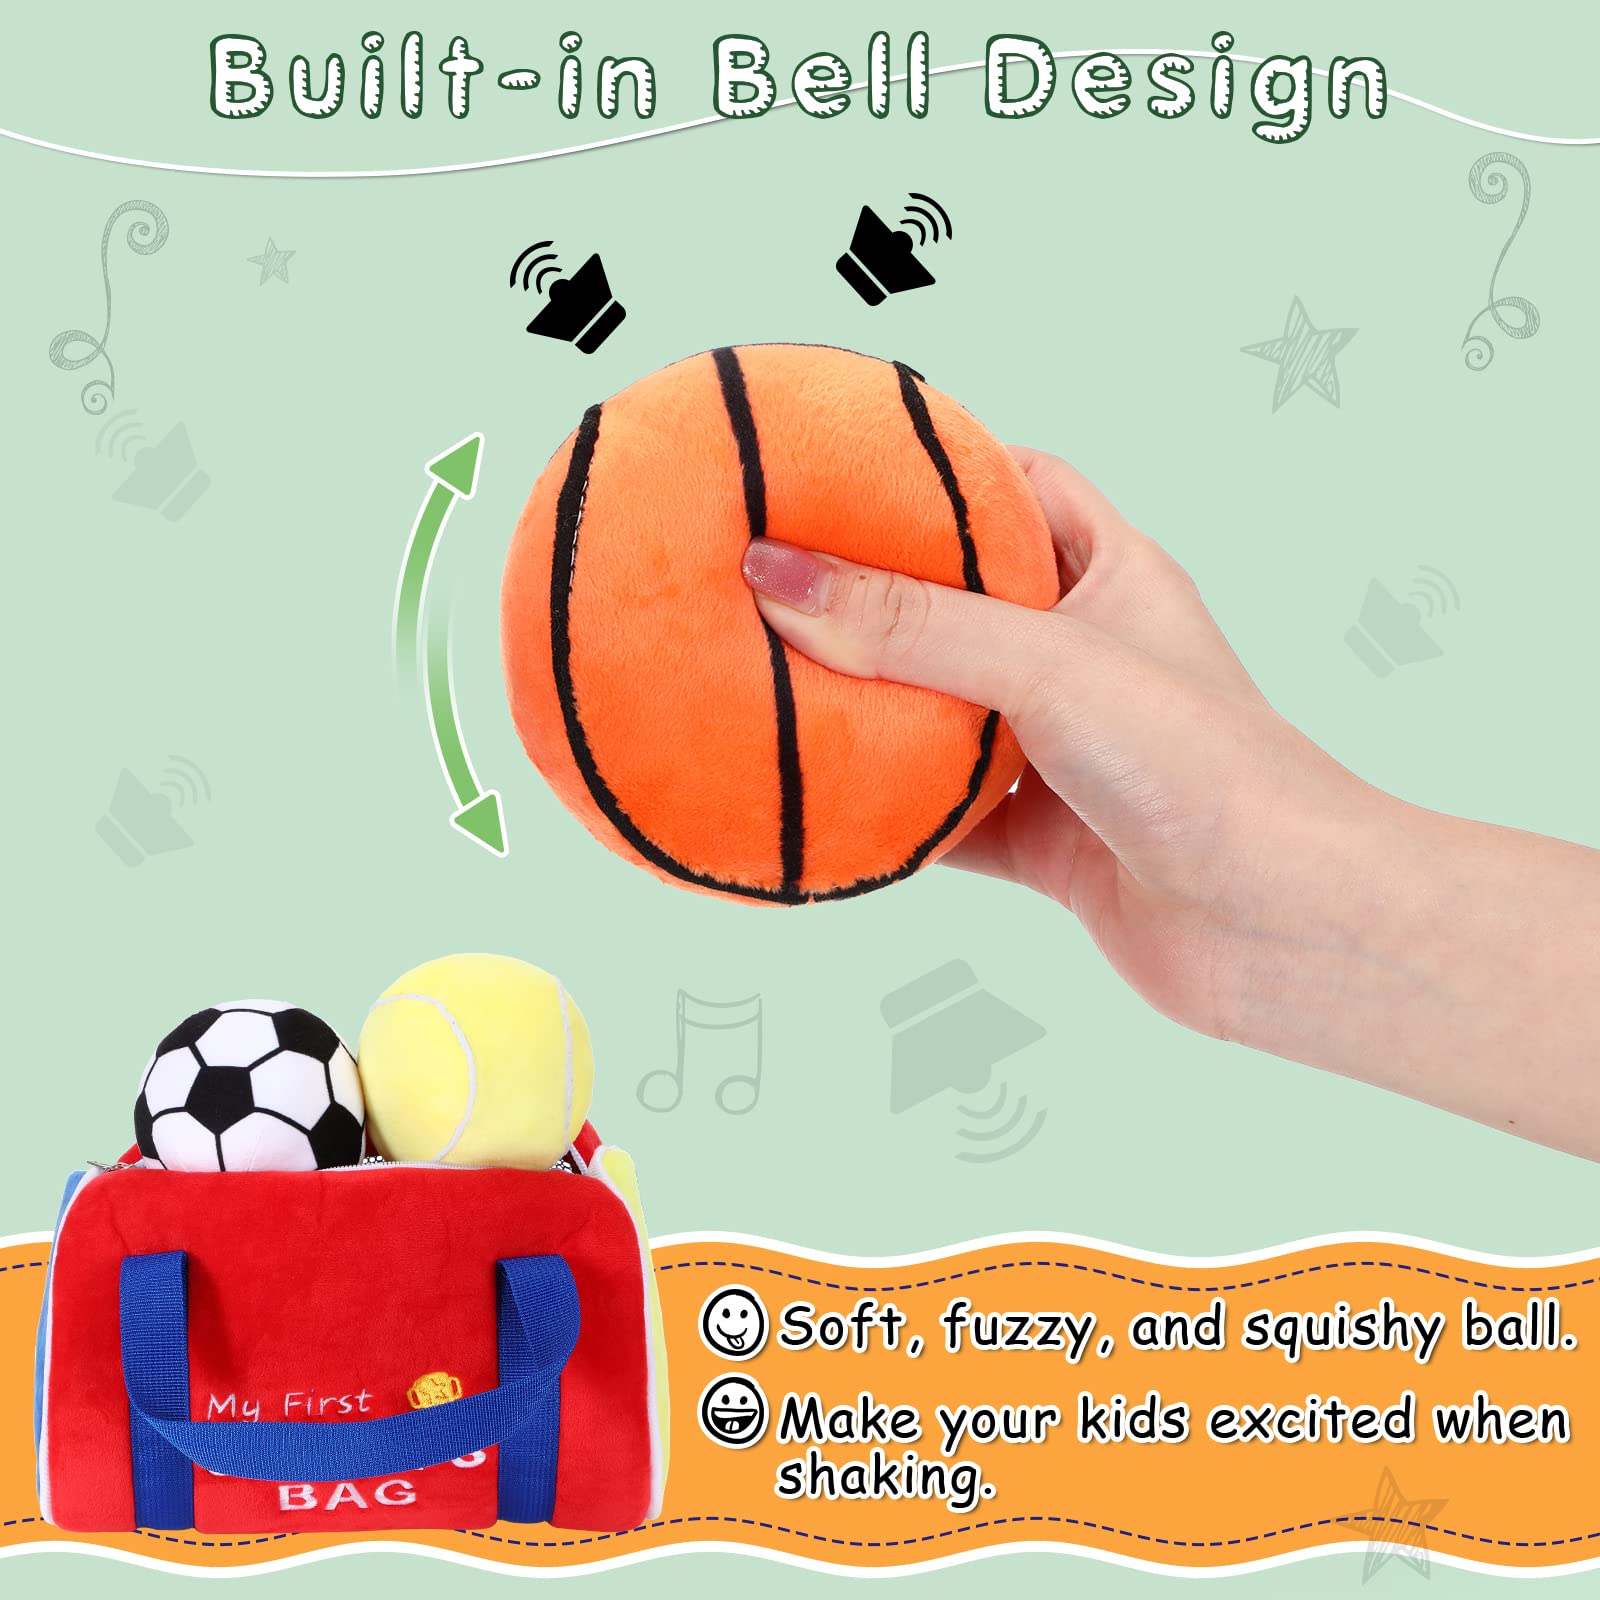 Skylety 6 Pieces My Soft Sports Bag Stuffed Plush with Sound Playset Stuffed Plush Soccer Ball, Basketball, Tennis, Baseball, Football for Little Teenager Party Favor Sports Game